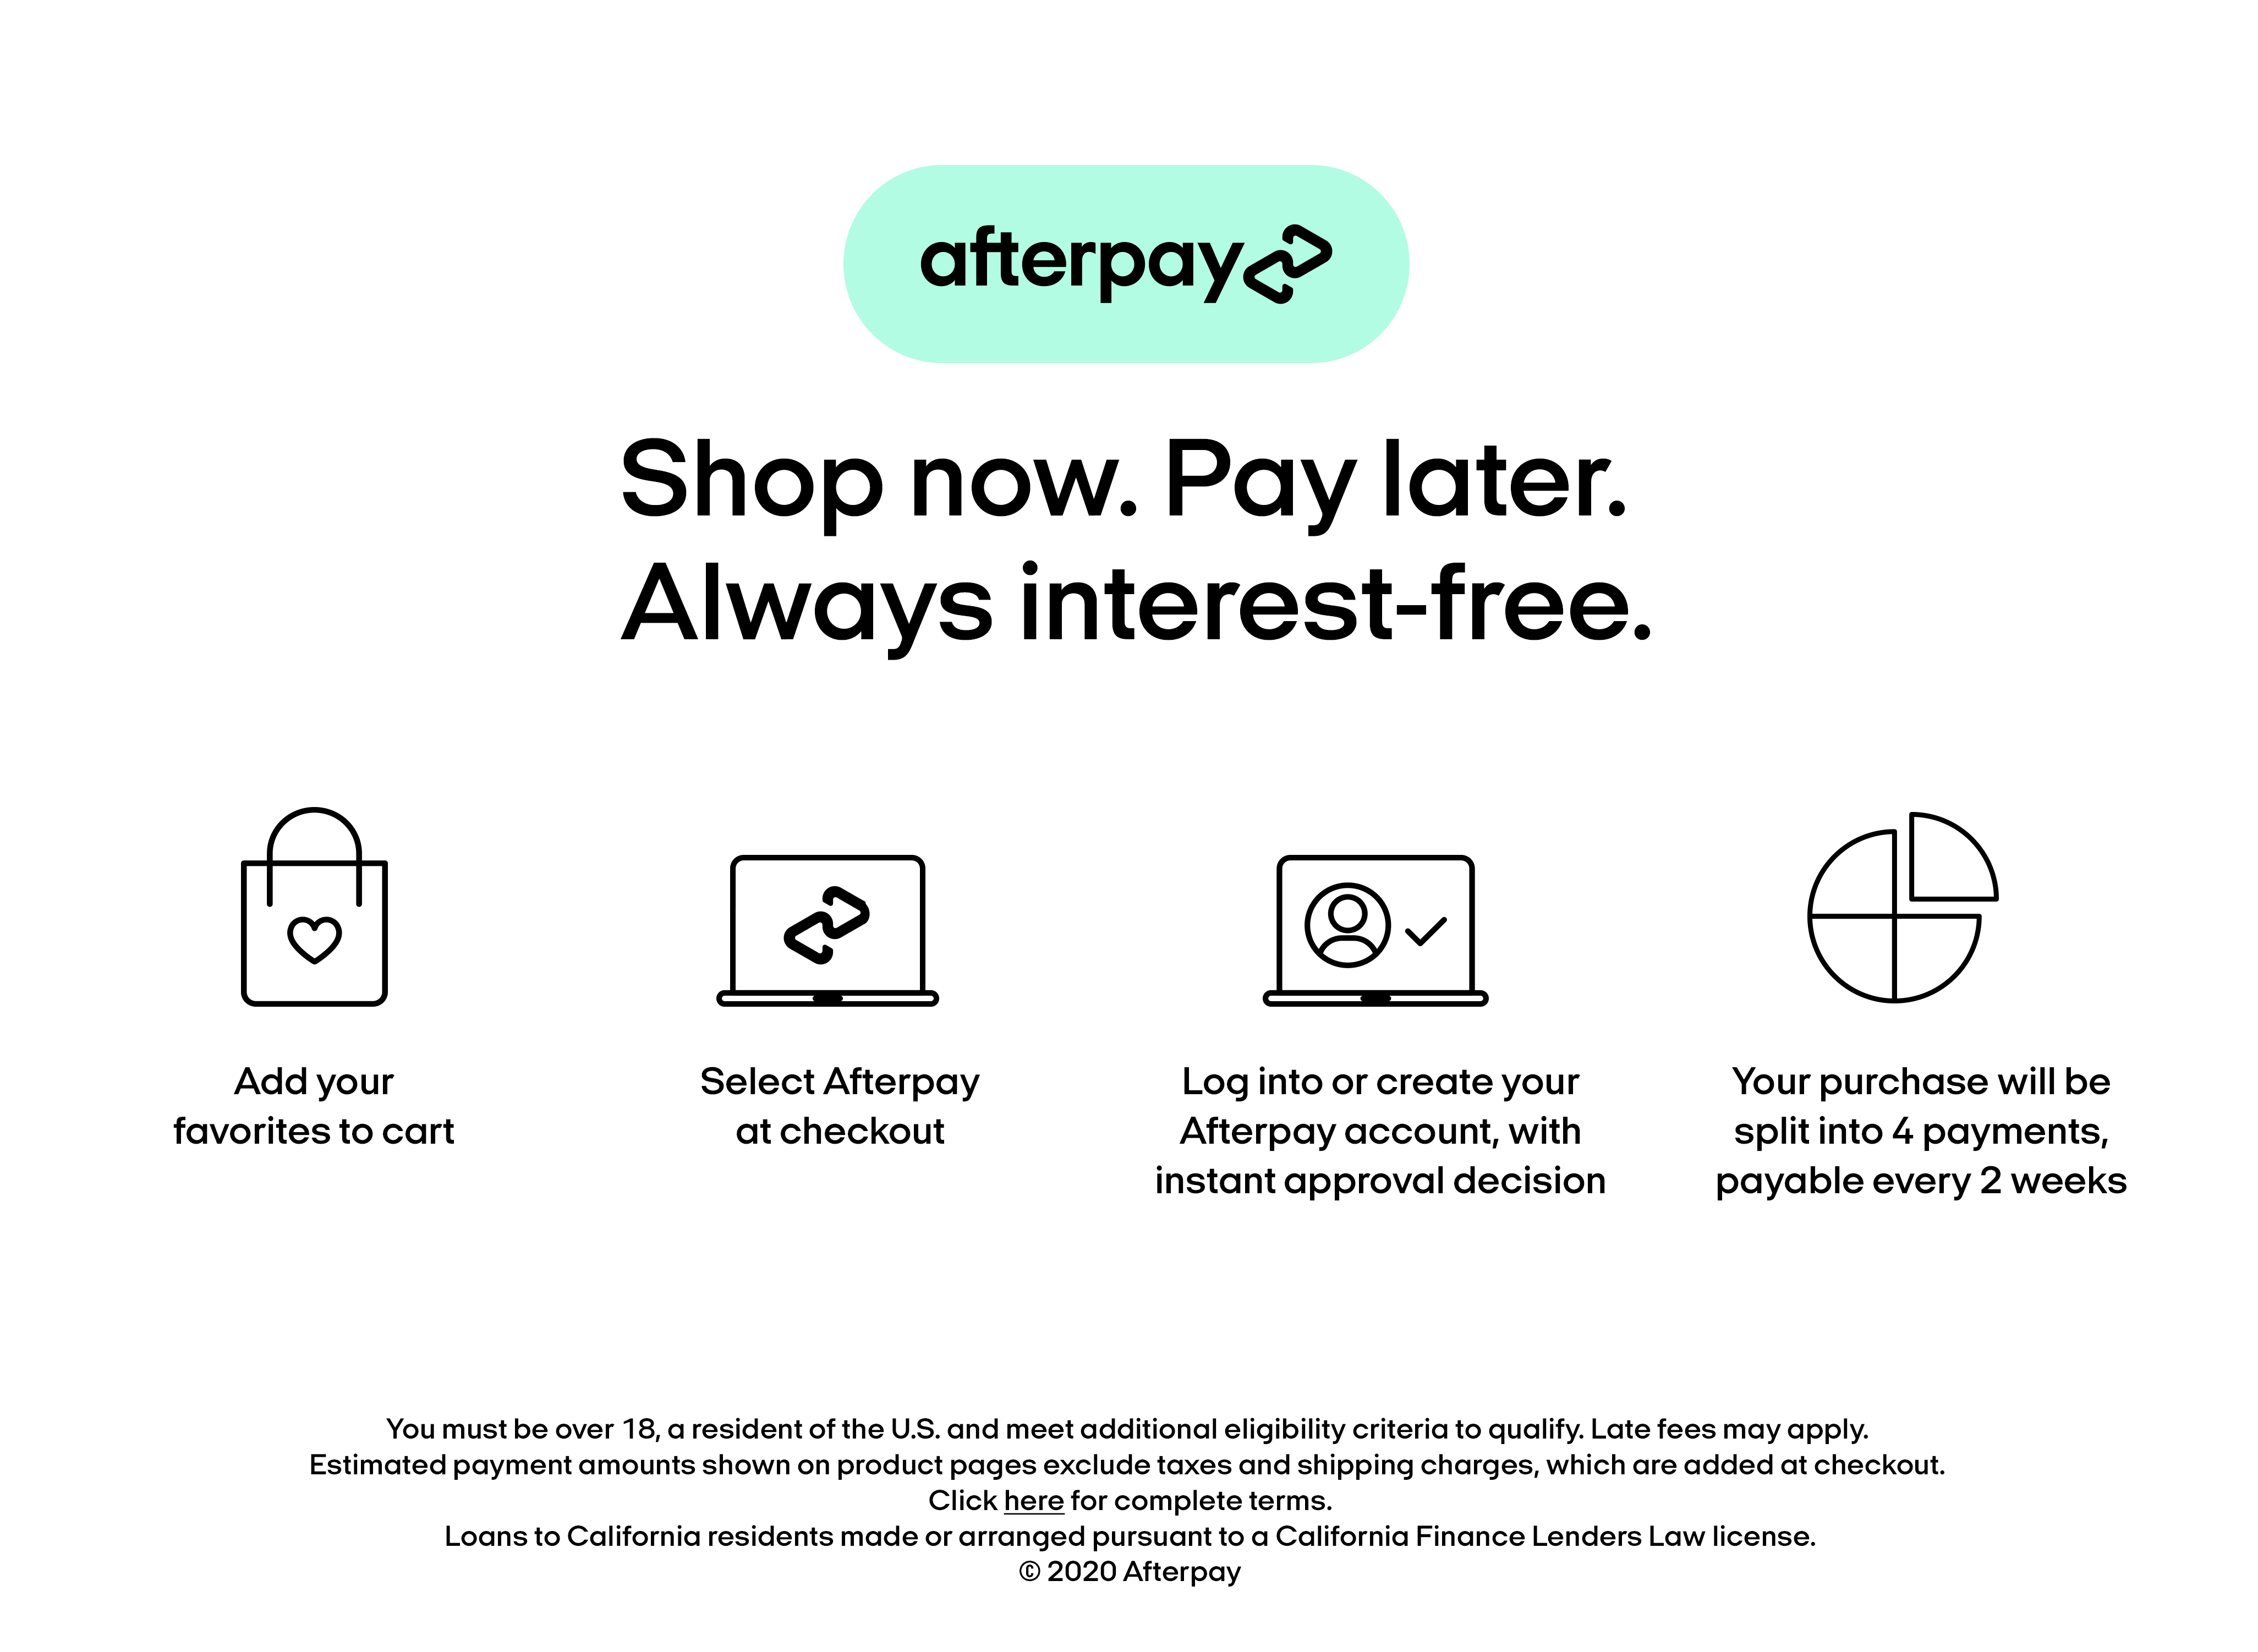 We accept afterpay⭐️ Afterpay is an app that allows you to shop now and pay  later. It's always interest free and easy to use. Visit…